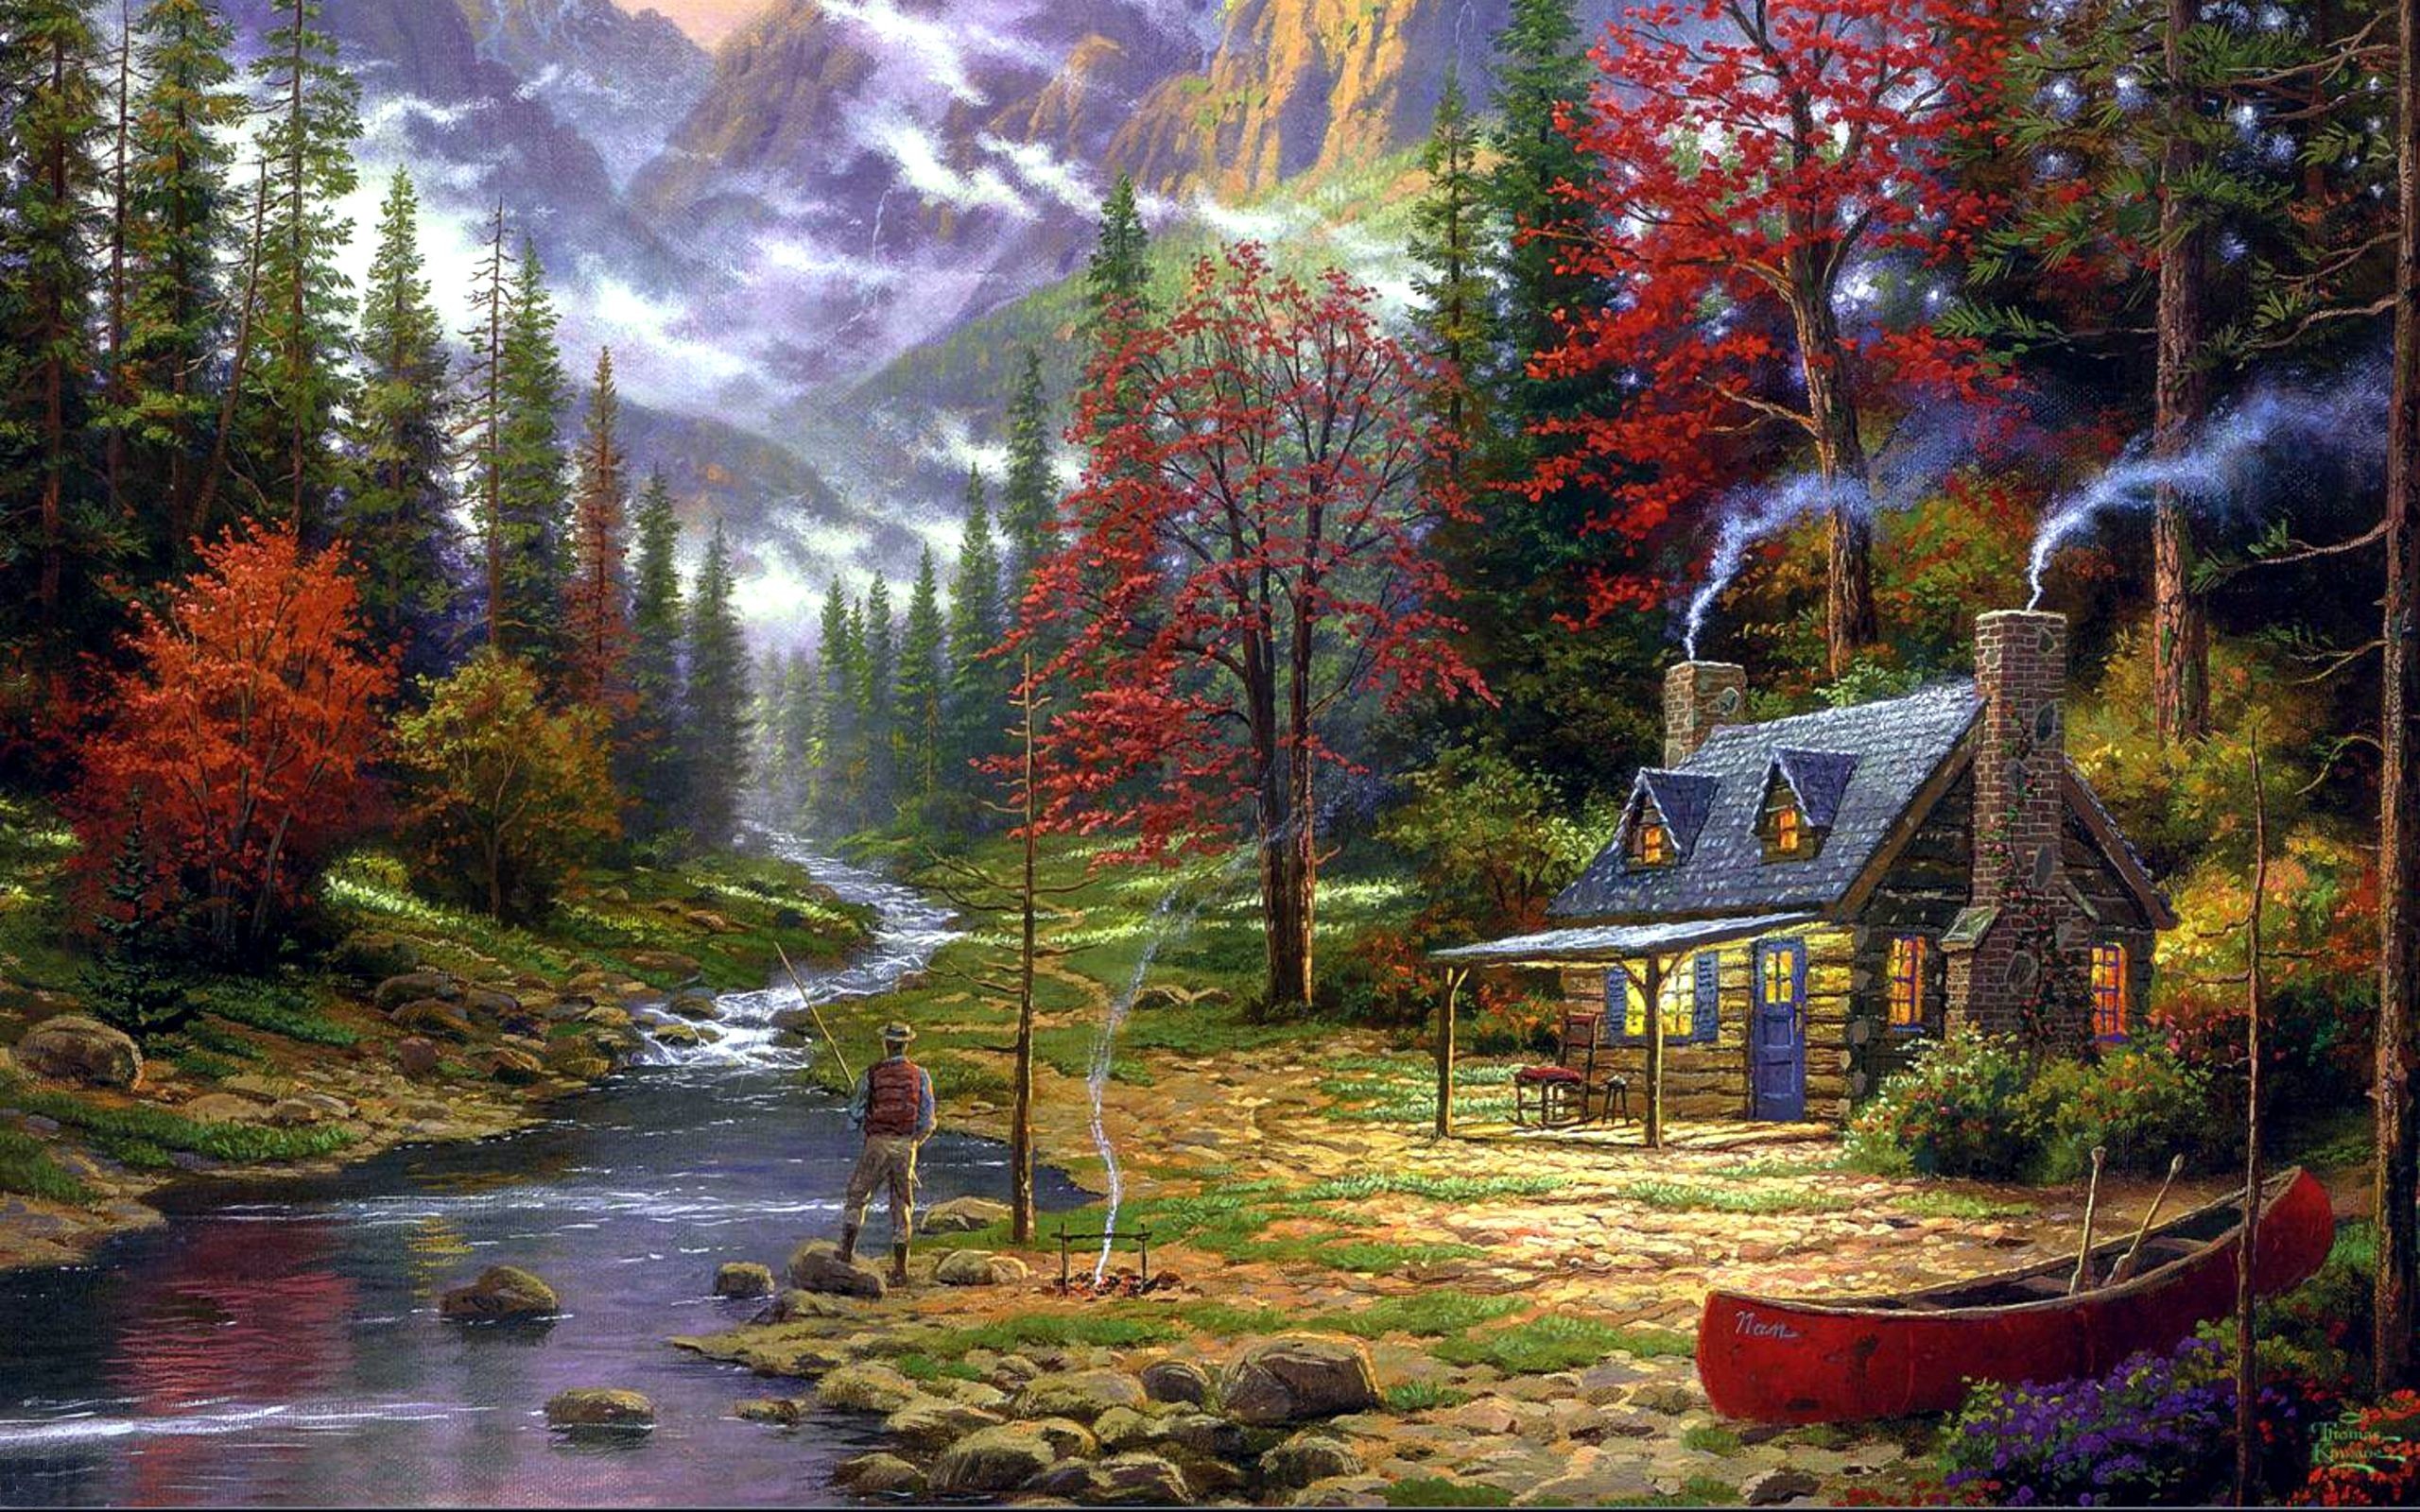 Cottage Wallpapers and Background Images   stmednet